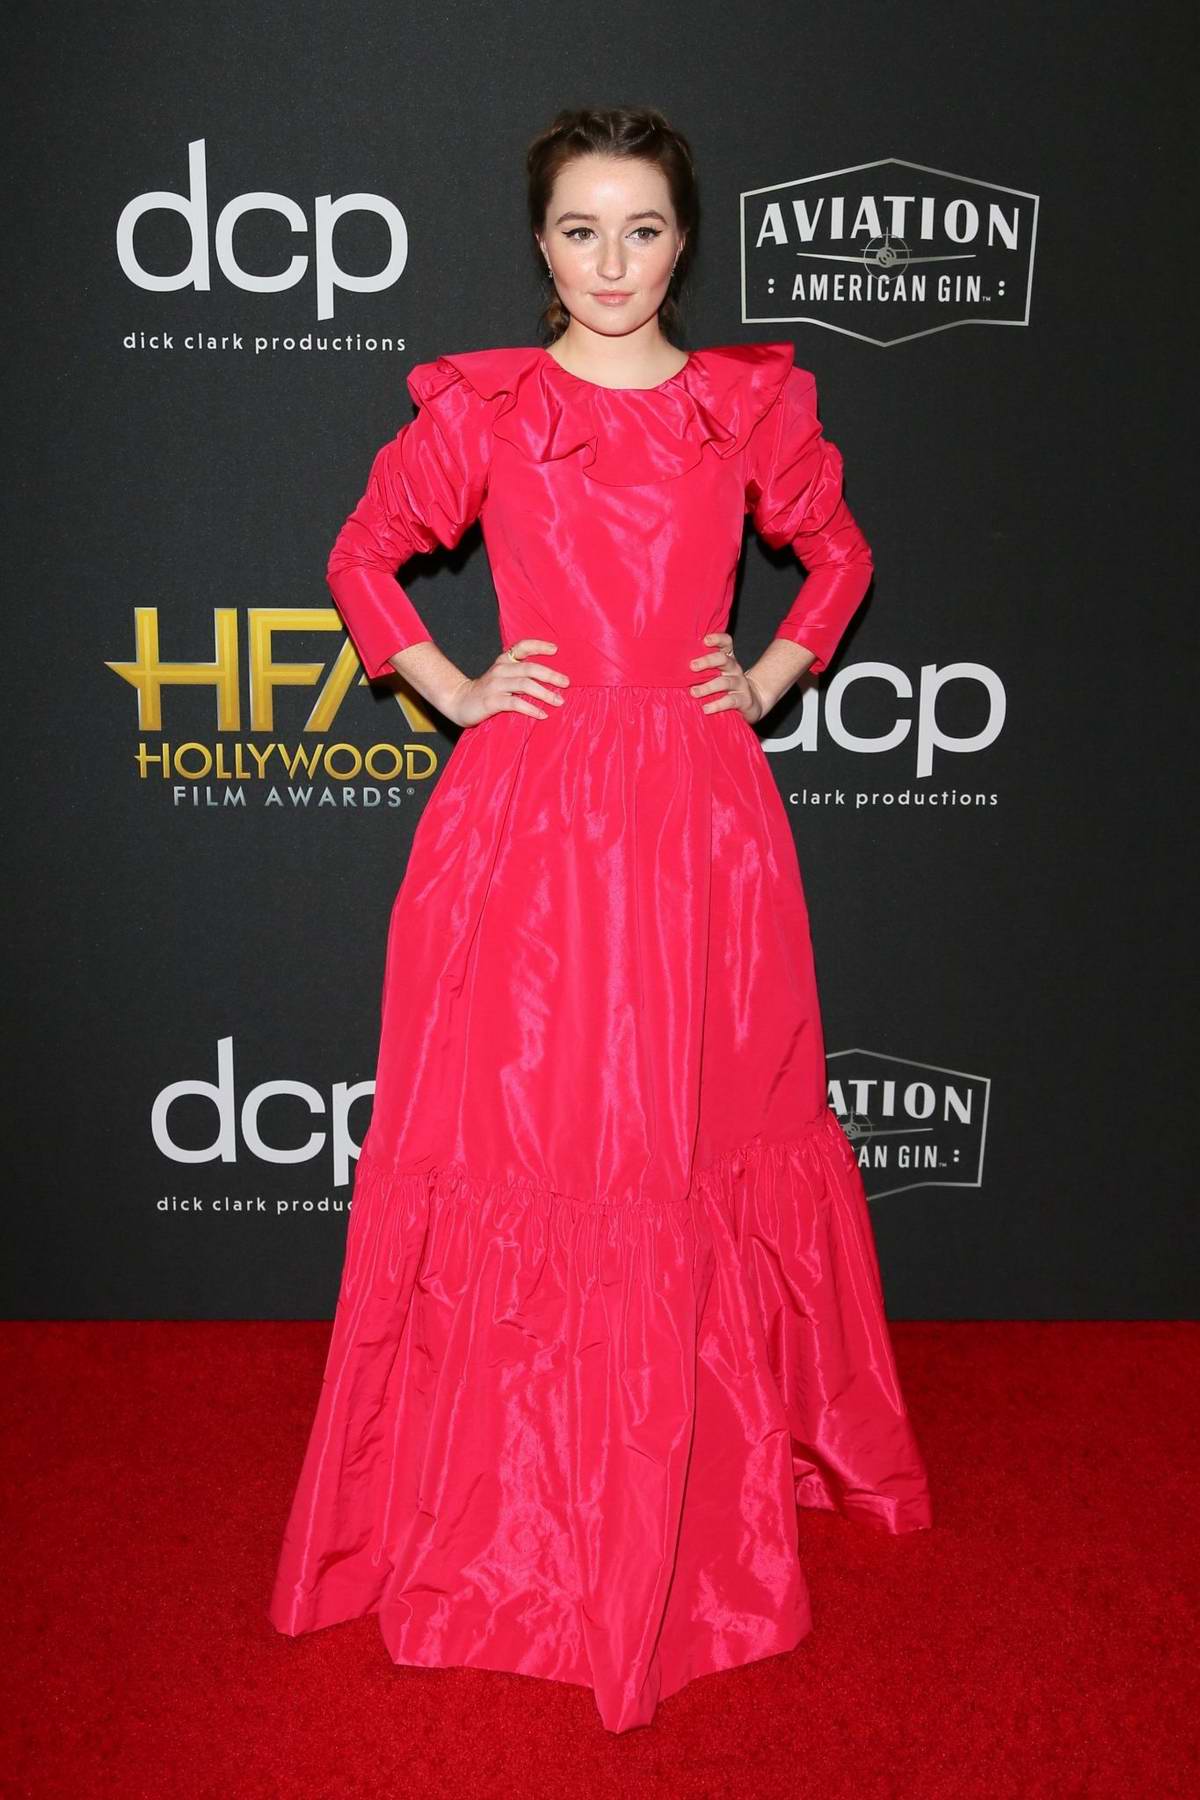 kaitlyn-dever-in-monique-lhuillier-2019-hollywood-film-awards-in-la